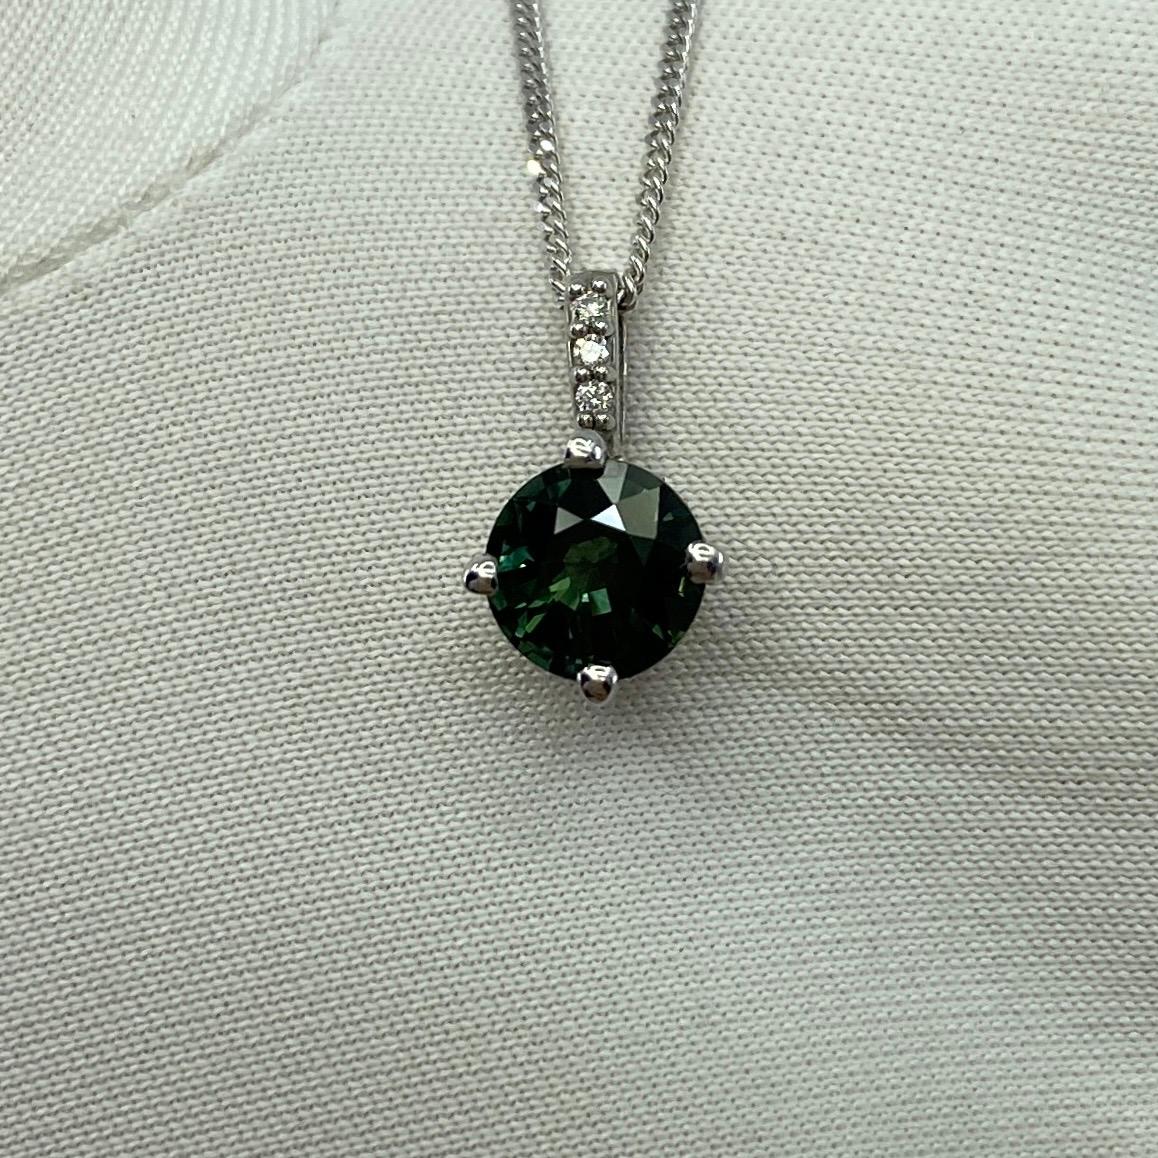 Untreated Green Blue Sapphire 18k White Gold Diamond Surround Set Pendant.

1.05 Carat sapphire with fine vivid green blue colour and excellent clarity. Also has an excellent round cut which displays the fine colour to best effect. Very bright and